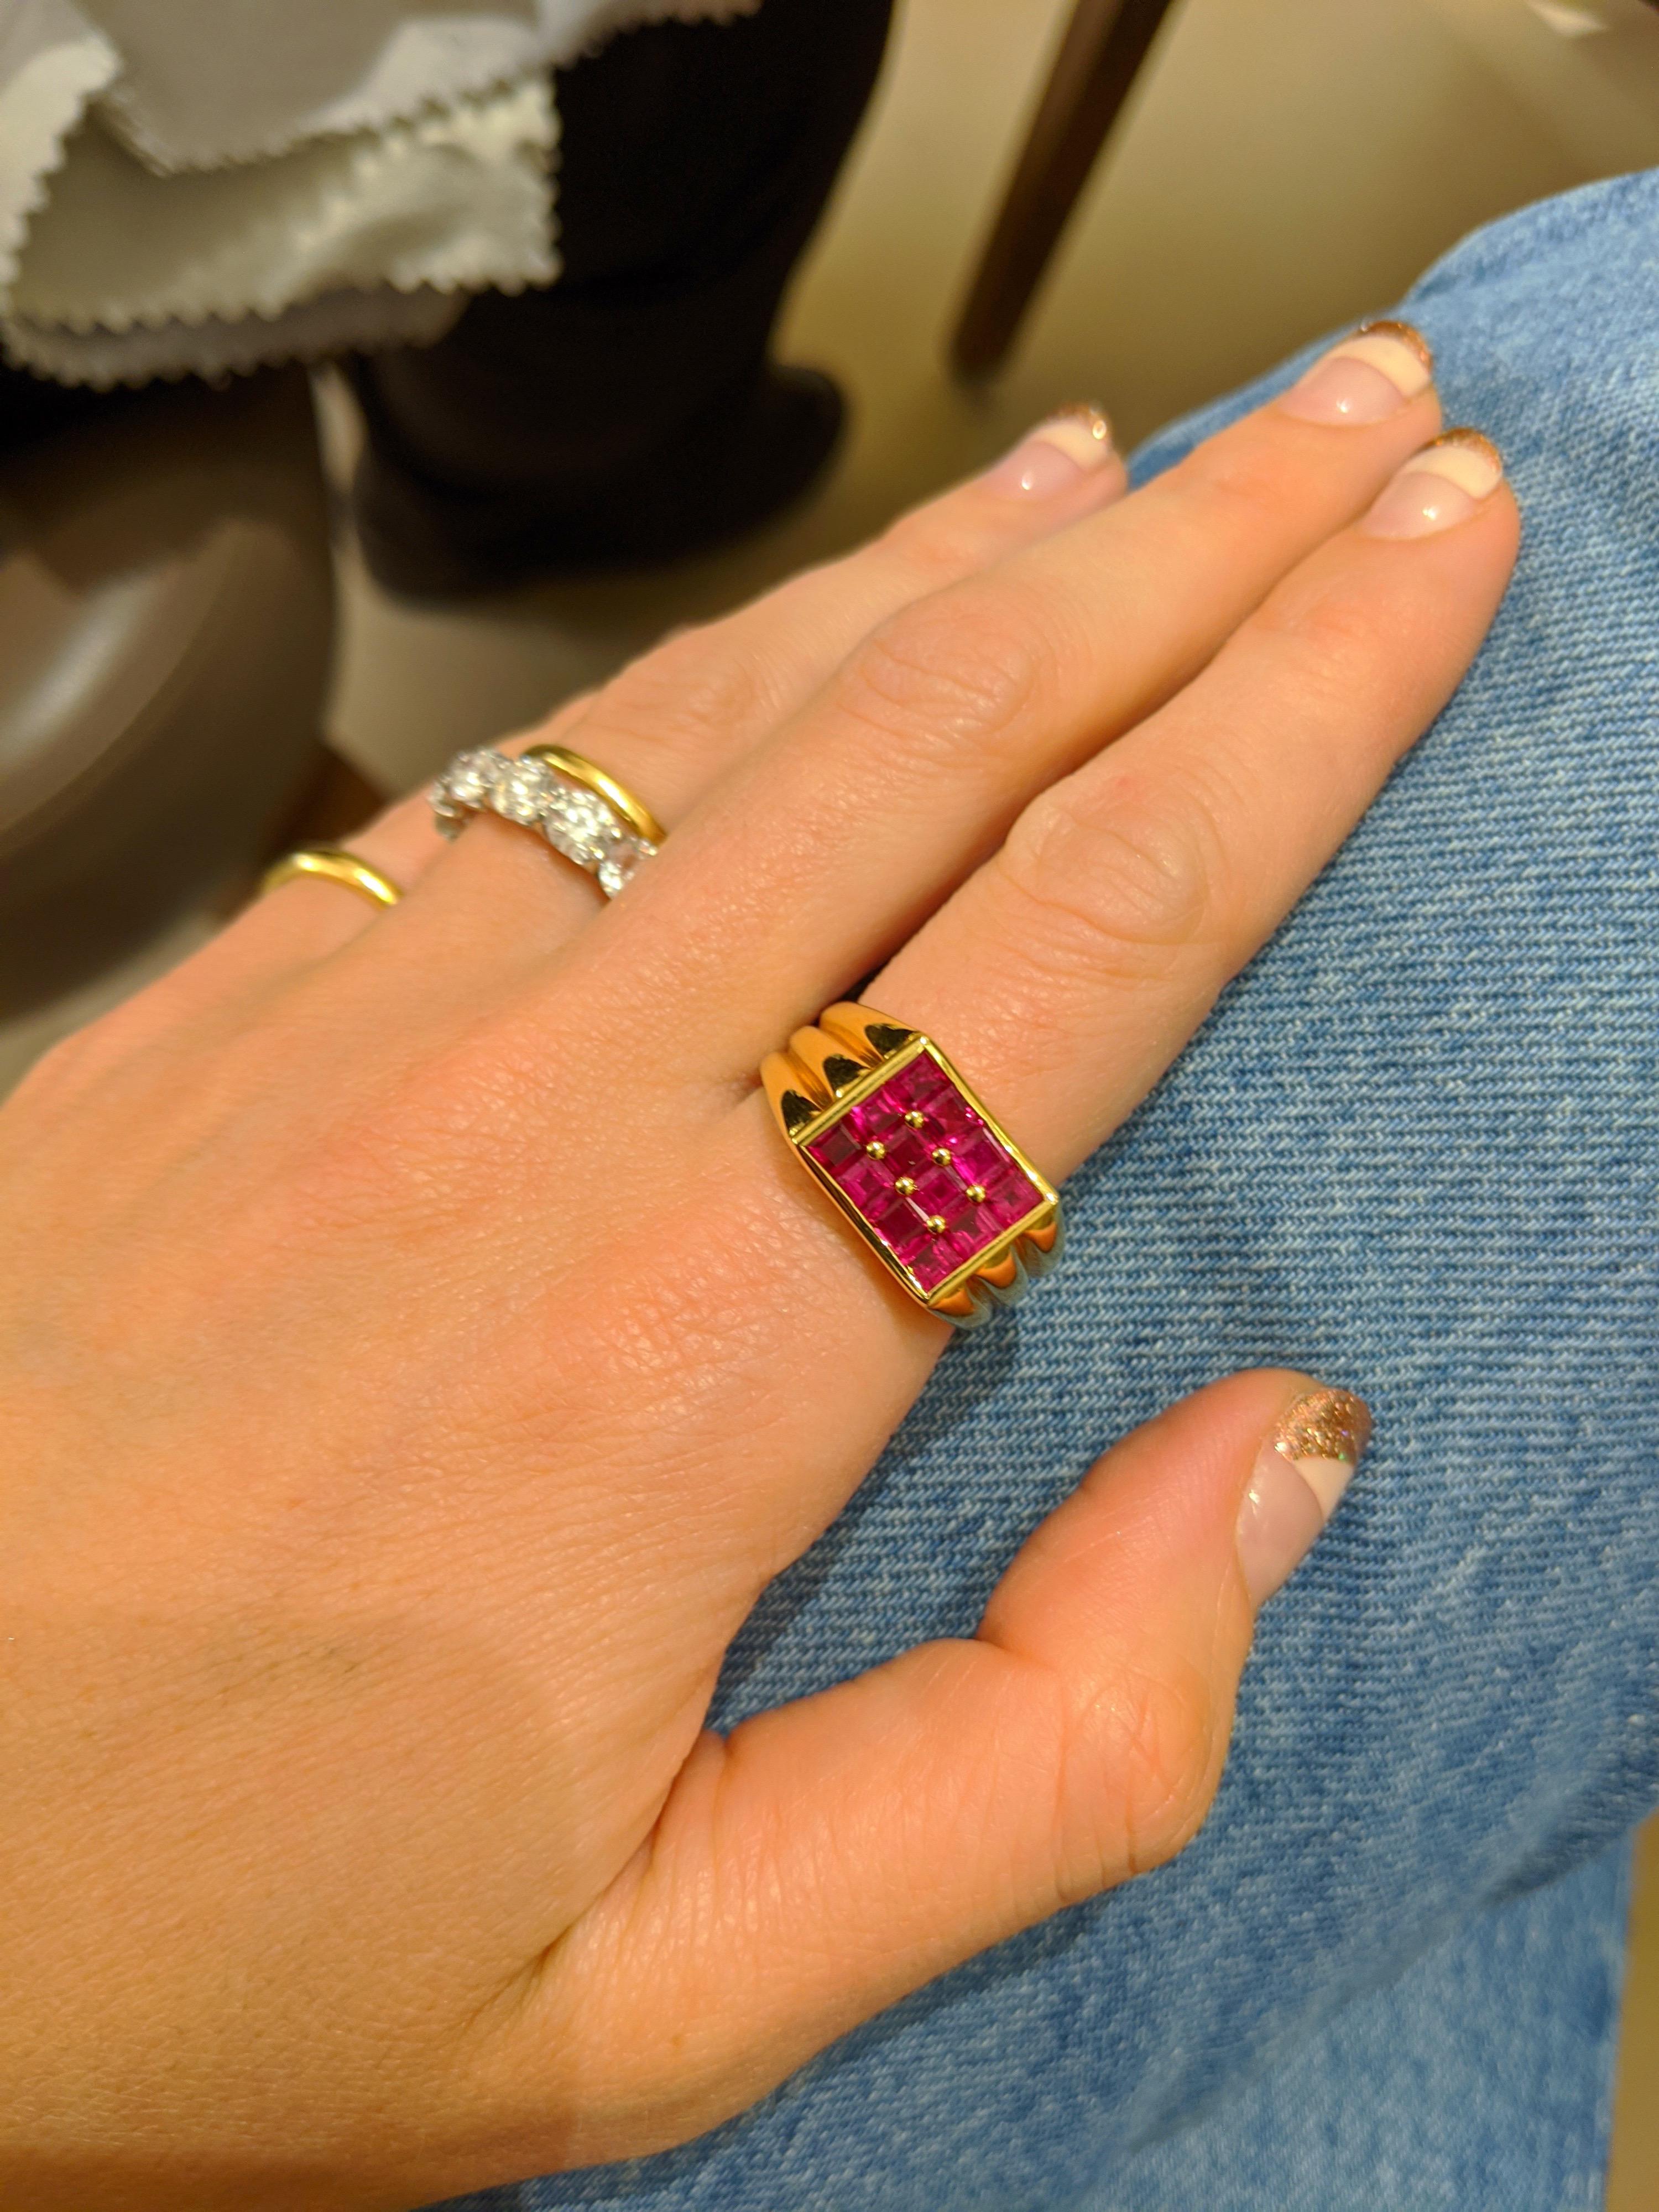 Designed by George Gero, this 18kt yellow gold  gents ring is set with 12 square cut Rubies in a concave cloute (small gold beads) setting. The shank has 3 ribbed sections that go all the way around.
Ring size 10   Sizing options may be